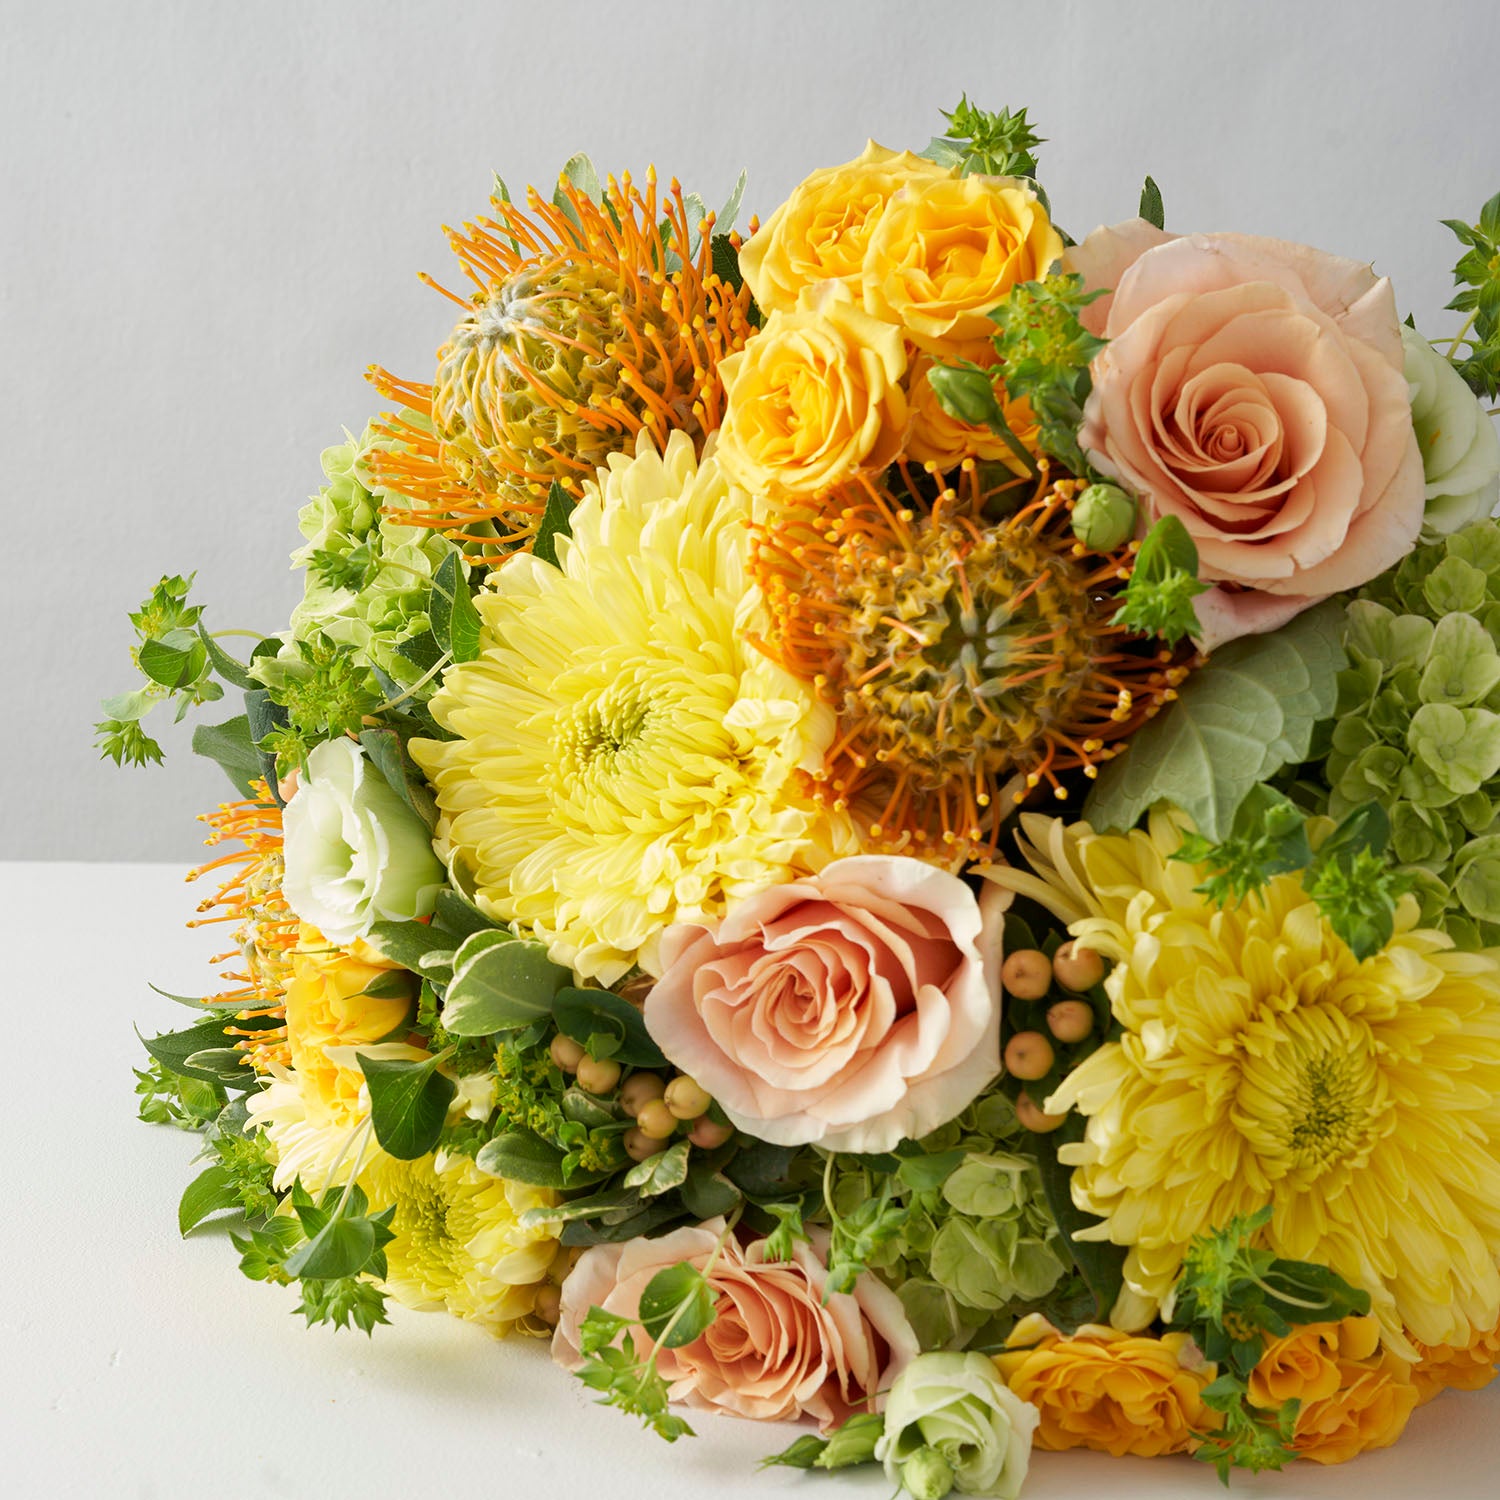 Close up of bouquet of yellow chrysanthemums, peach roses, green hydrangea, peach hypericum berries and gold protea flowers on white background.